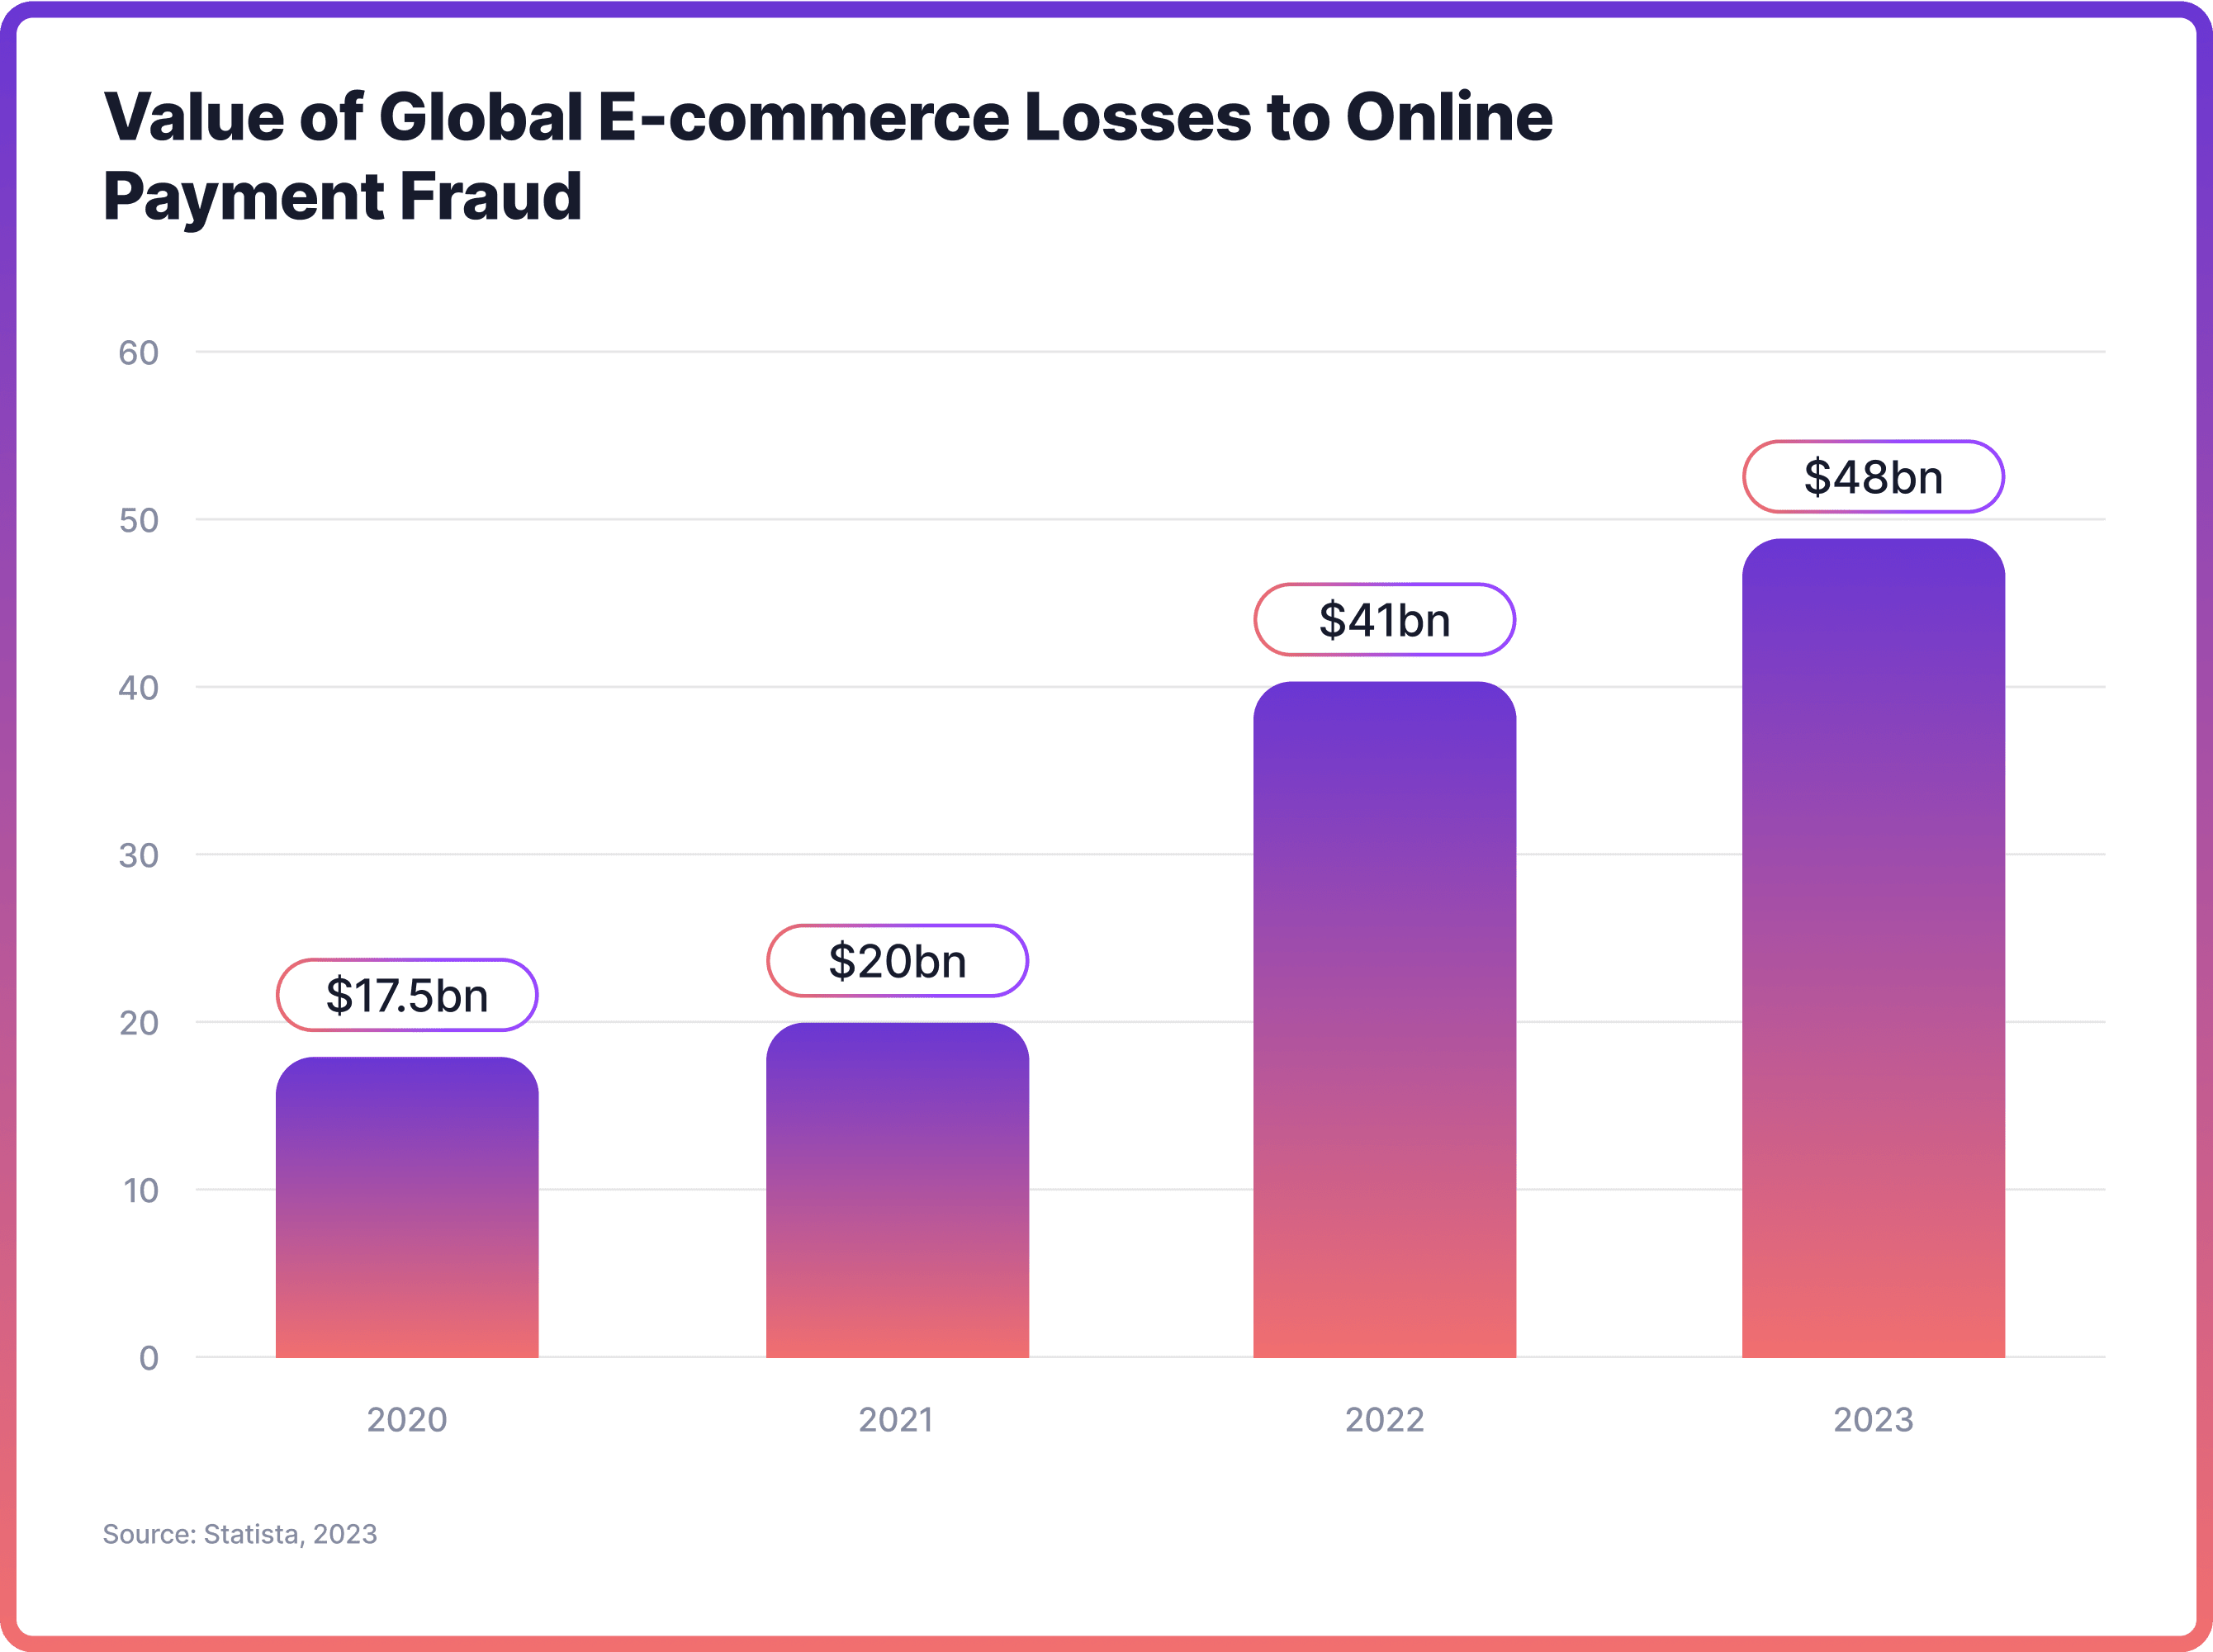 Value of Global E-commerce Losses to Online Payment Fraud